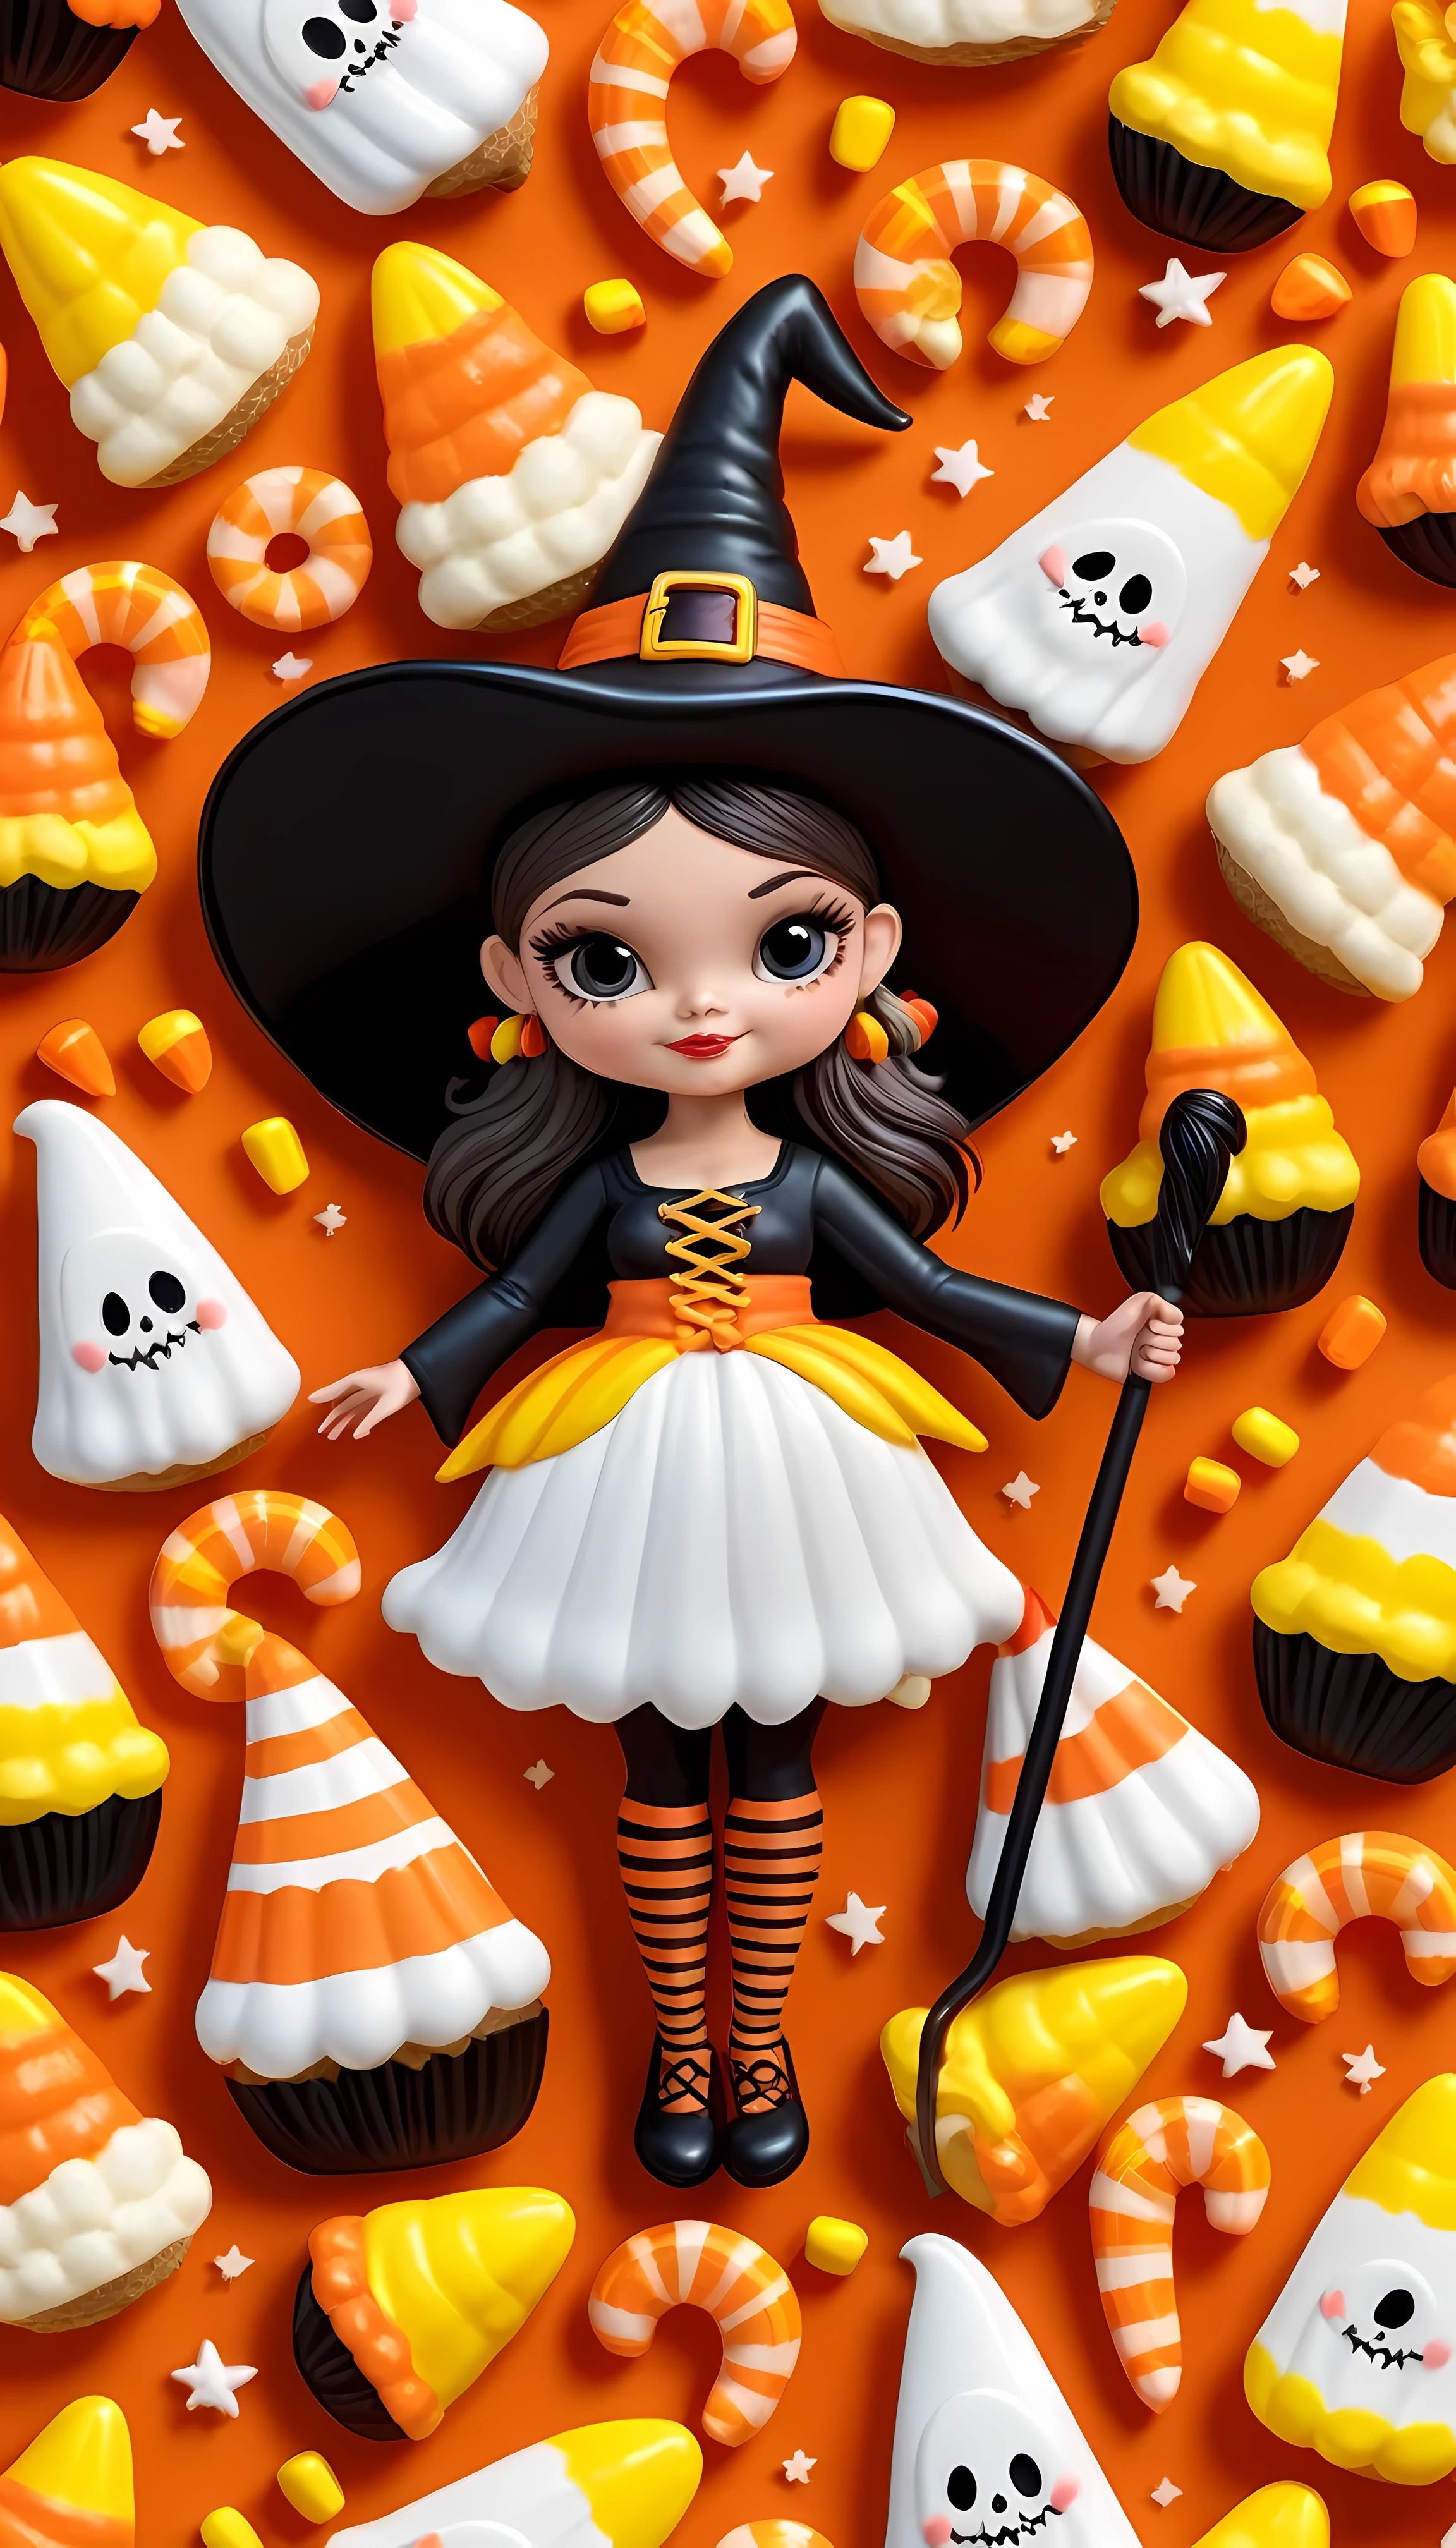 CuteCartoonAF, Cute Cartoon, masterpiece in maximum 16K resolution, superb quality, (a big sticker) on the modern fridge, designed as a whimsical Candy Corn Witch dressed in an outfit with candy corn and a holding a magical staff, surrounded with miniature whimsical elements such a candy corn houses and frighteningly adorable creatures, the overall design evokes a sense of awe, magic, and Halloween wonder.